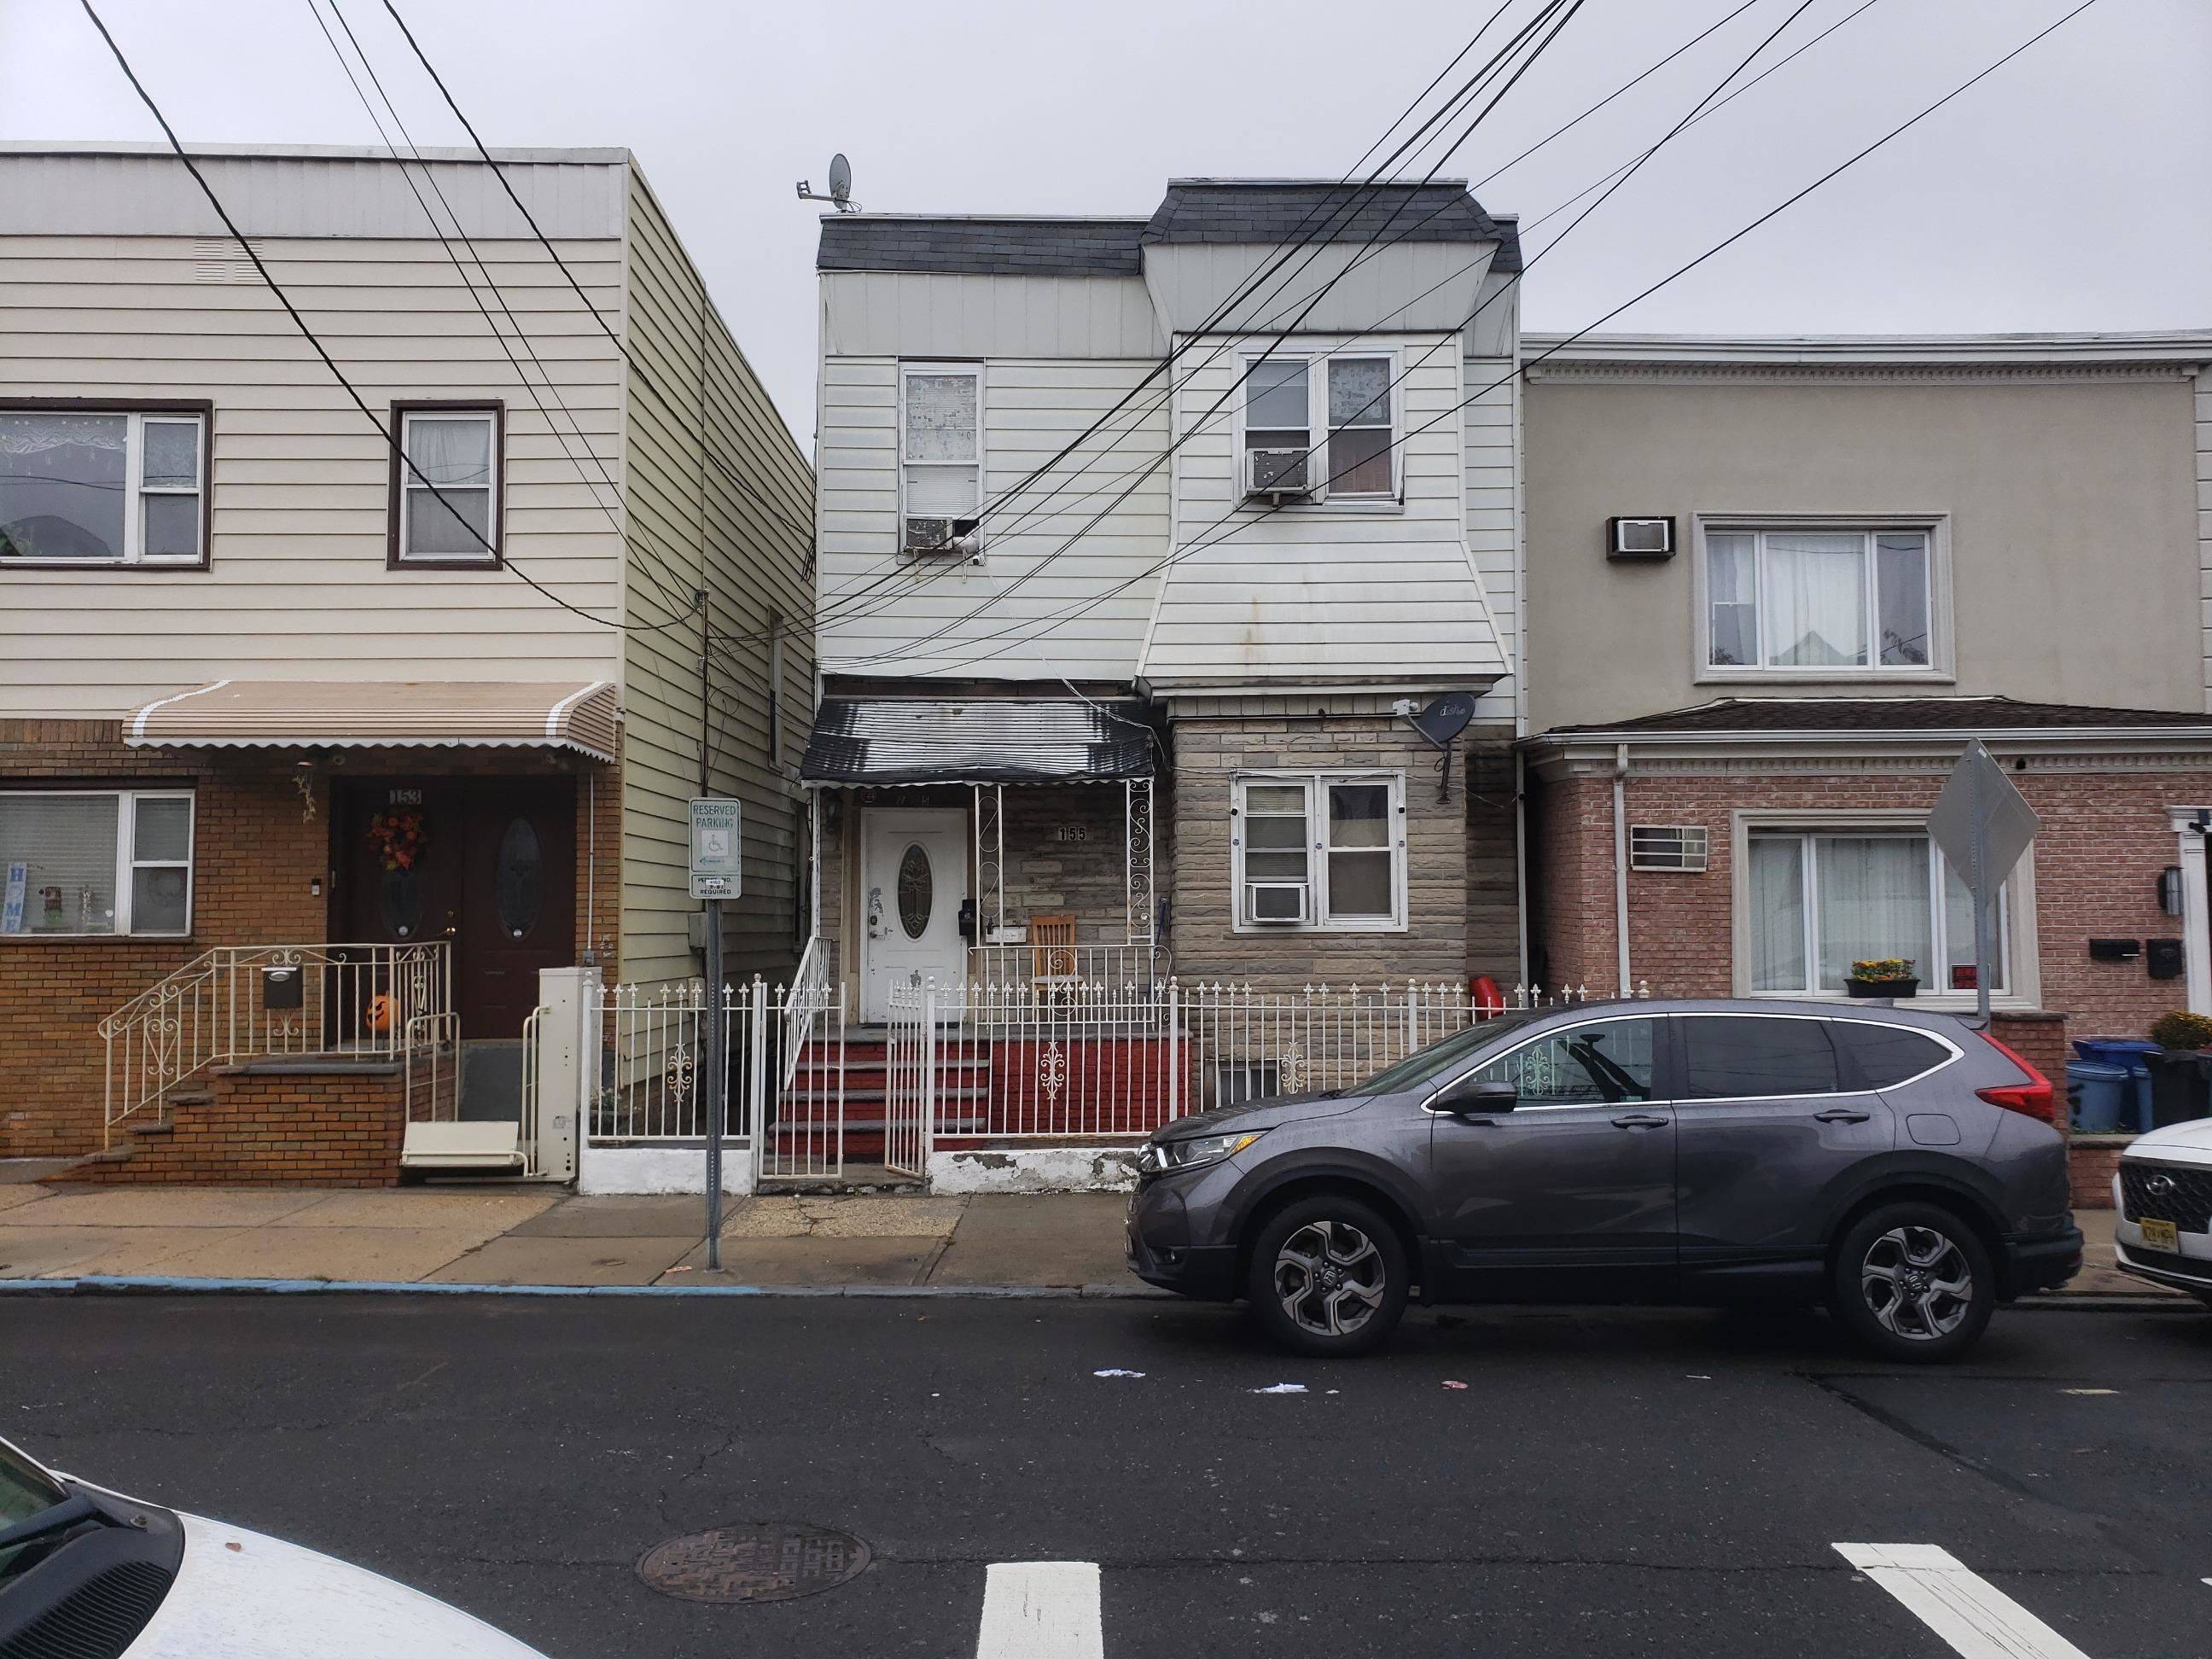 155 COLUMBIA AVE Multi-Family New Jersey